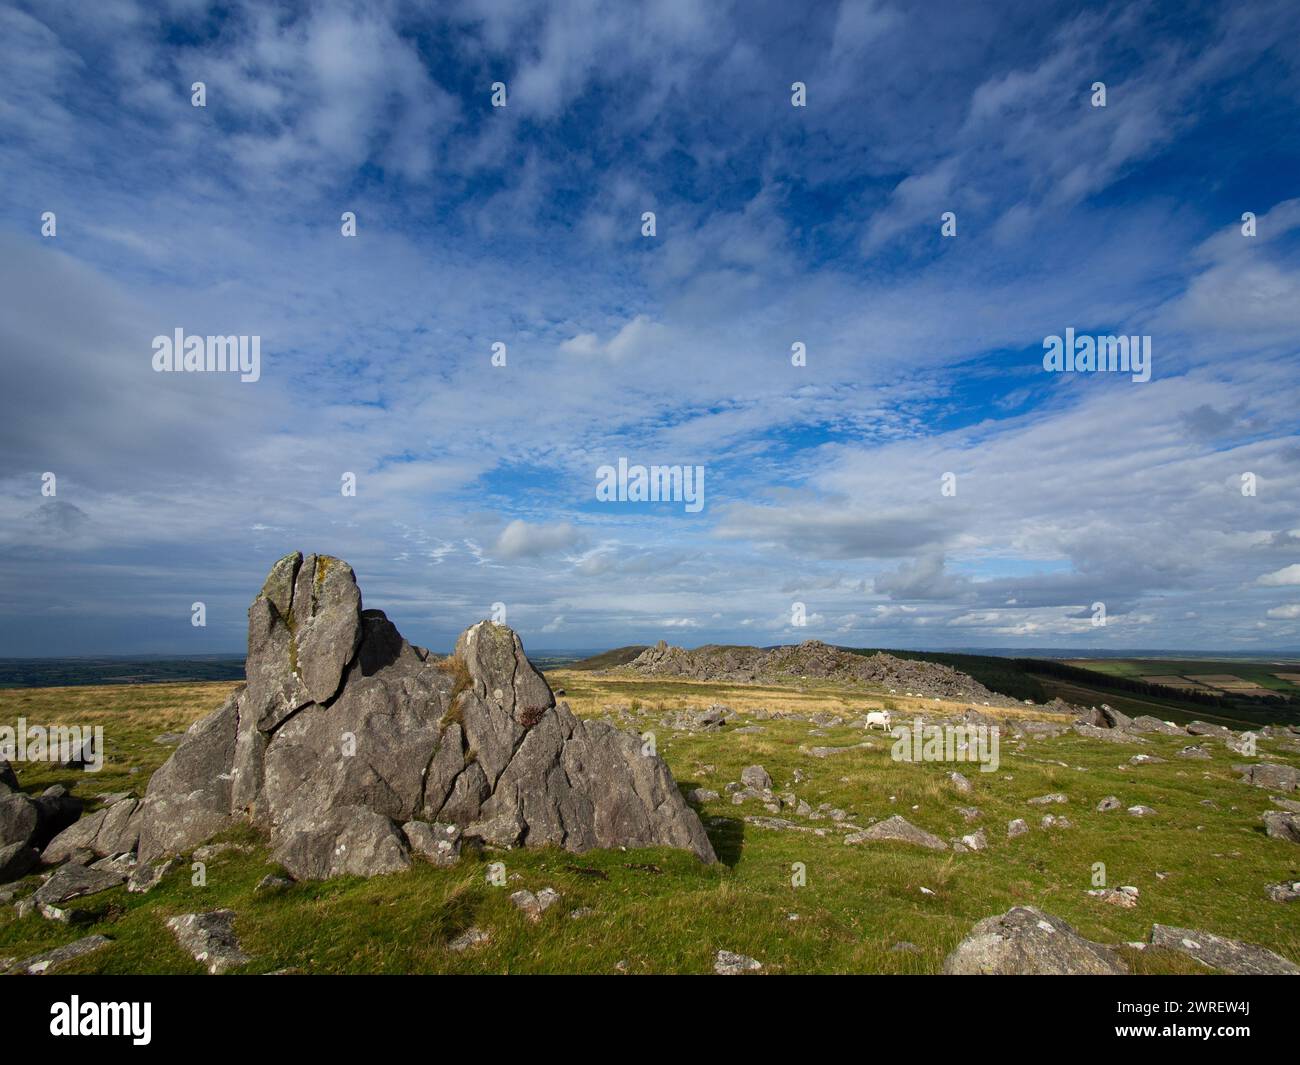 A rocky outcrop in the Preseli Hills, North Pembroke, Wales, United Kingdom.  Some of the Bluestones used at Stonehenge were transported from here. Stock Photo